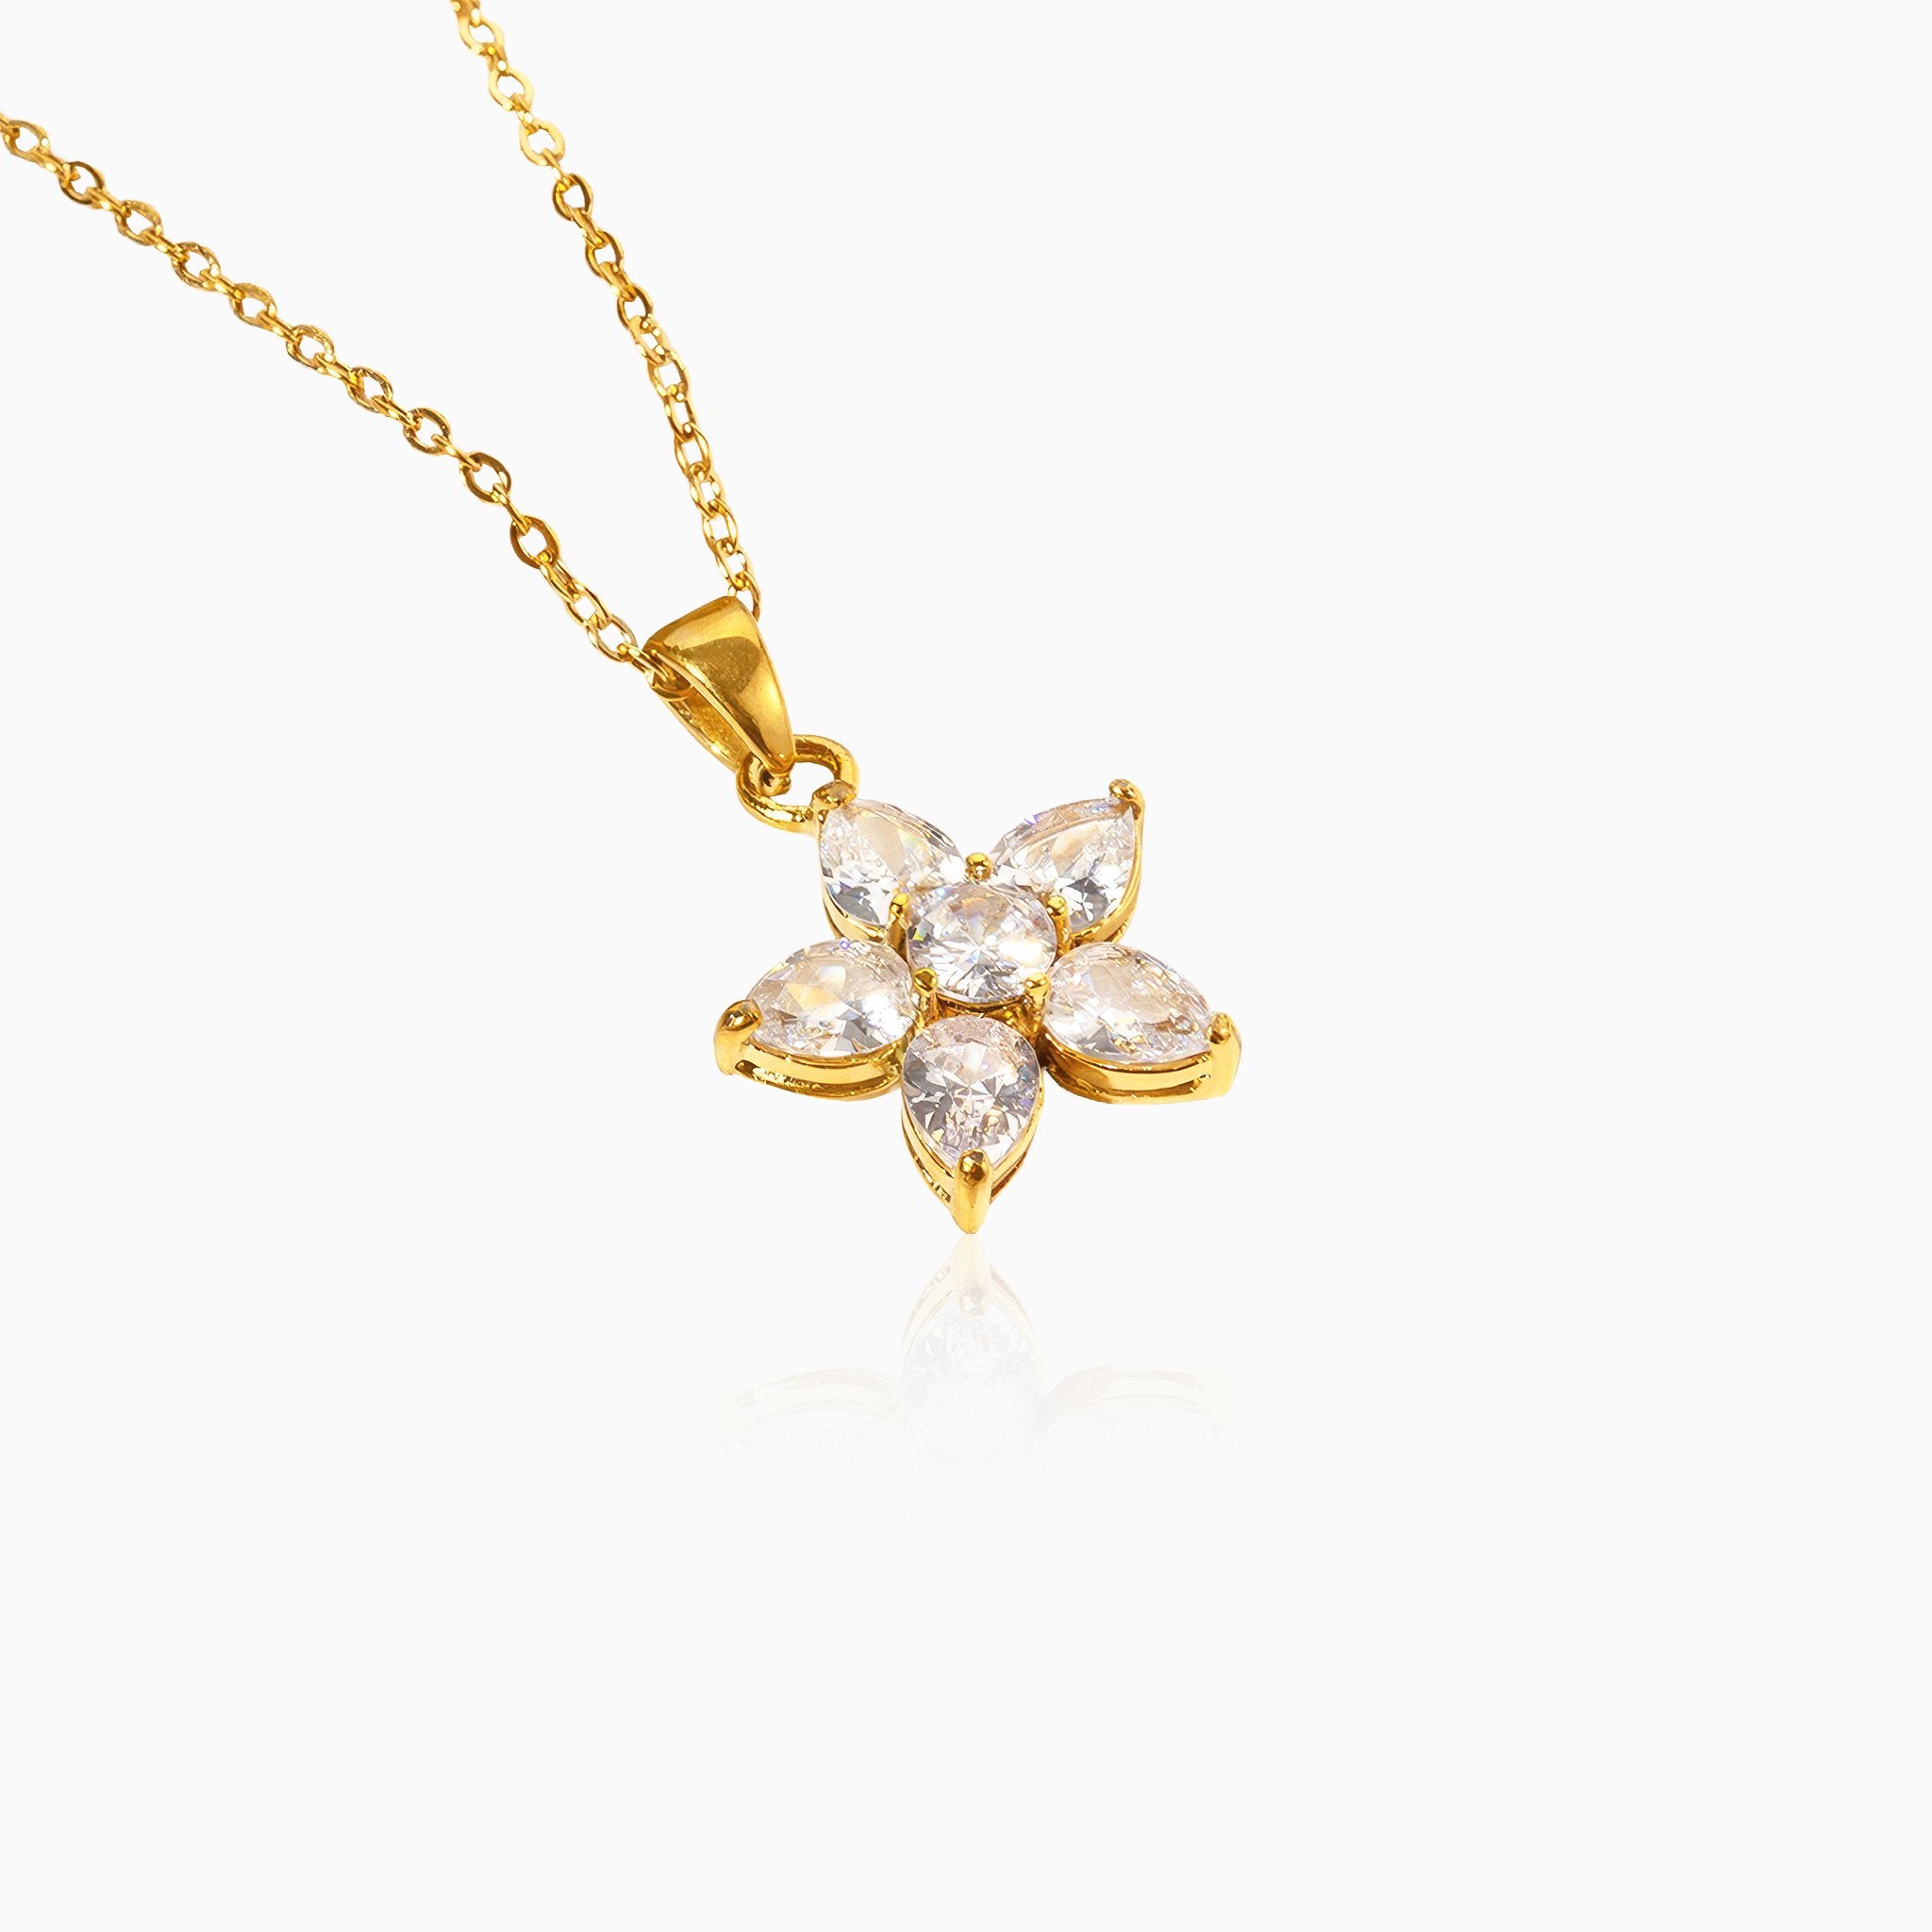 Five Petal Flower Pendant Necklace - Nobbier - Necklace - 18K Gold And Titanium PVD Coated Jewelry